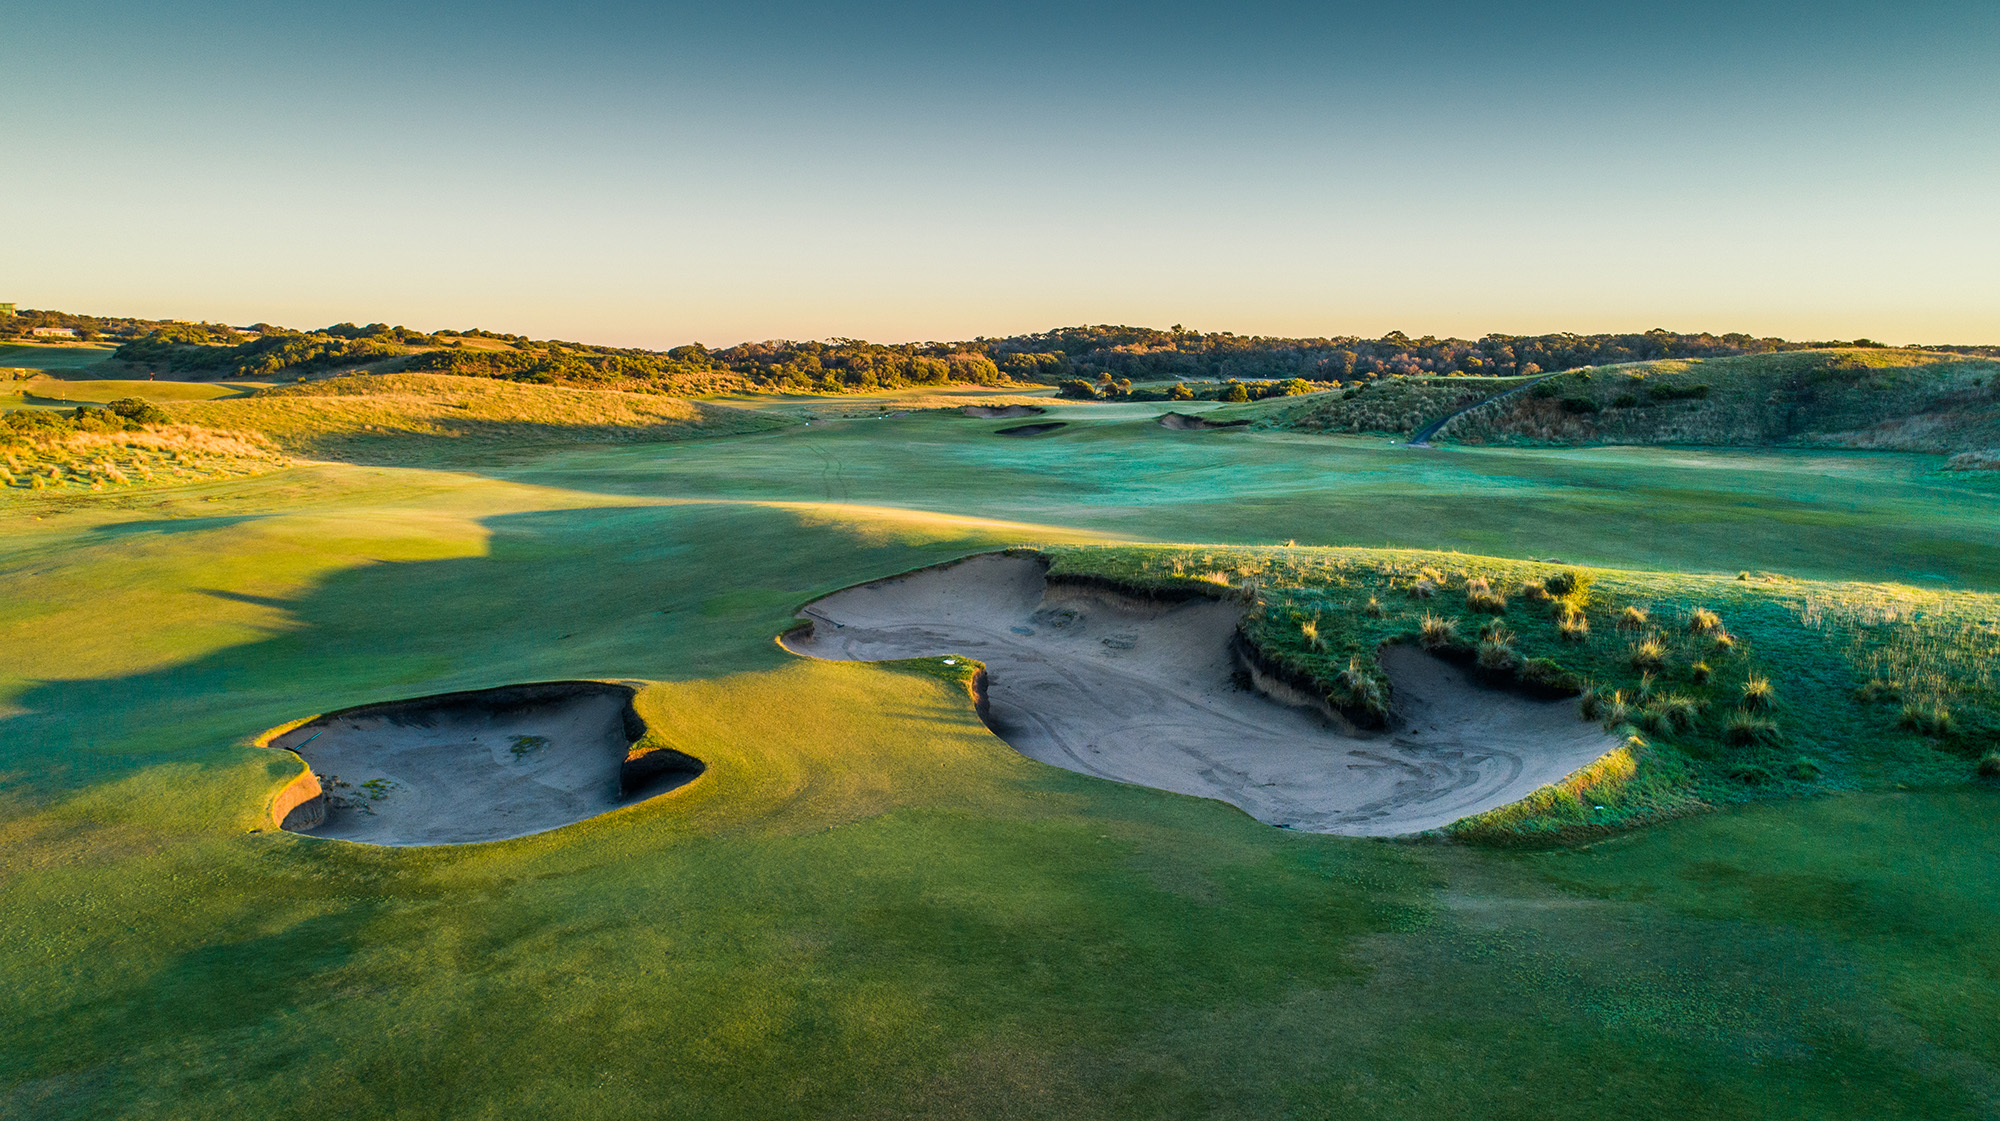 First morning light on the bunker complex which divides the shared fairway of the 7th and 8th holes.